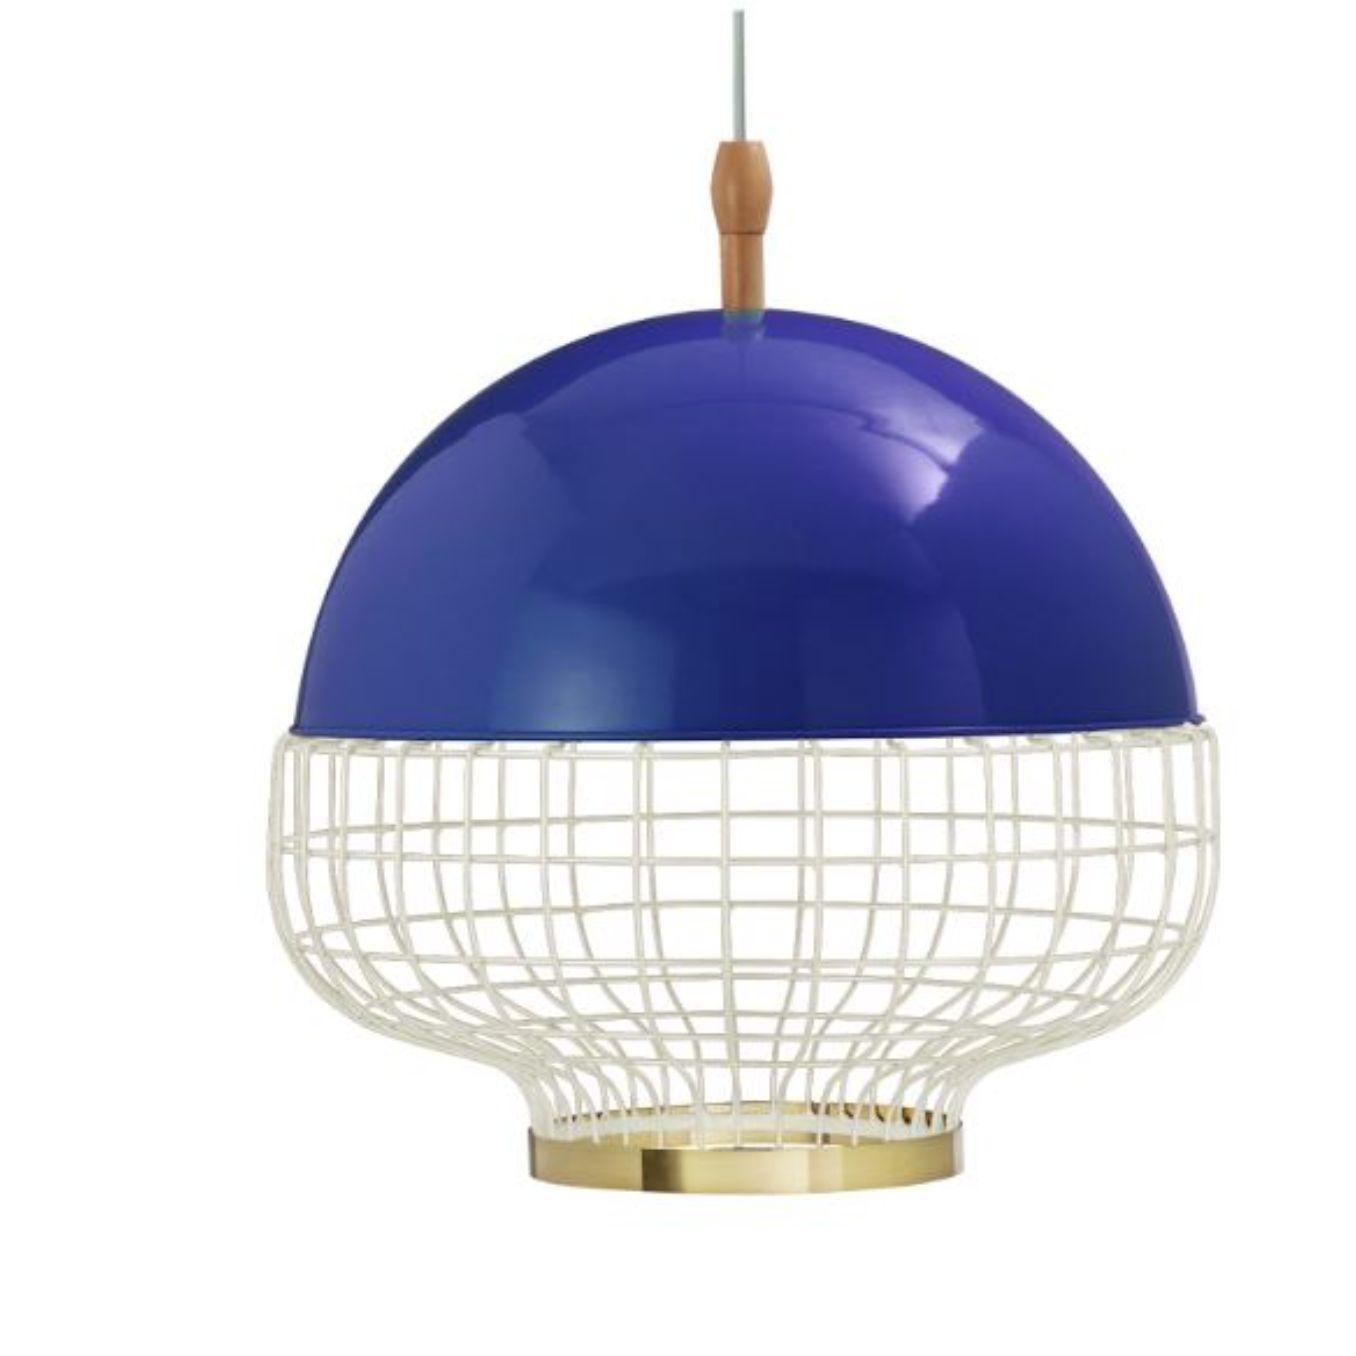 Cobalt Magnolia I suspension lamp with brass ring by Dooq
Dimensions: W 65 x D 65 x H 57 cm
Materials: lacquered metal, polished or brushed metal, brass.
Also available in different colours and materials.

Information:
230V/50Hz
E27/1x20W